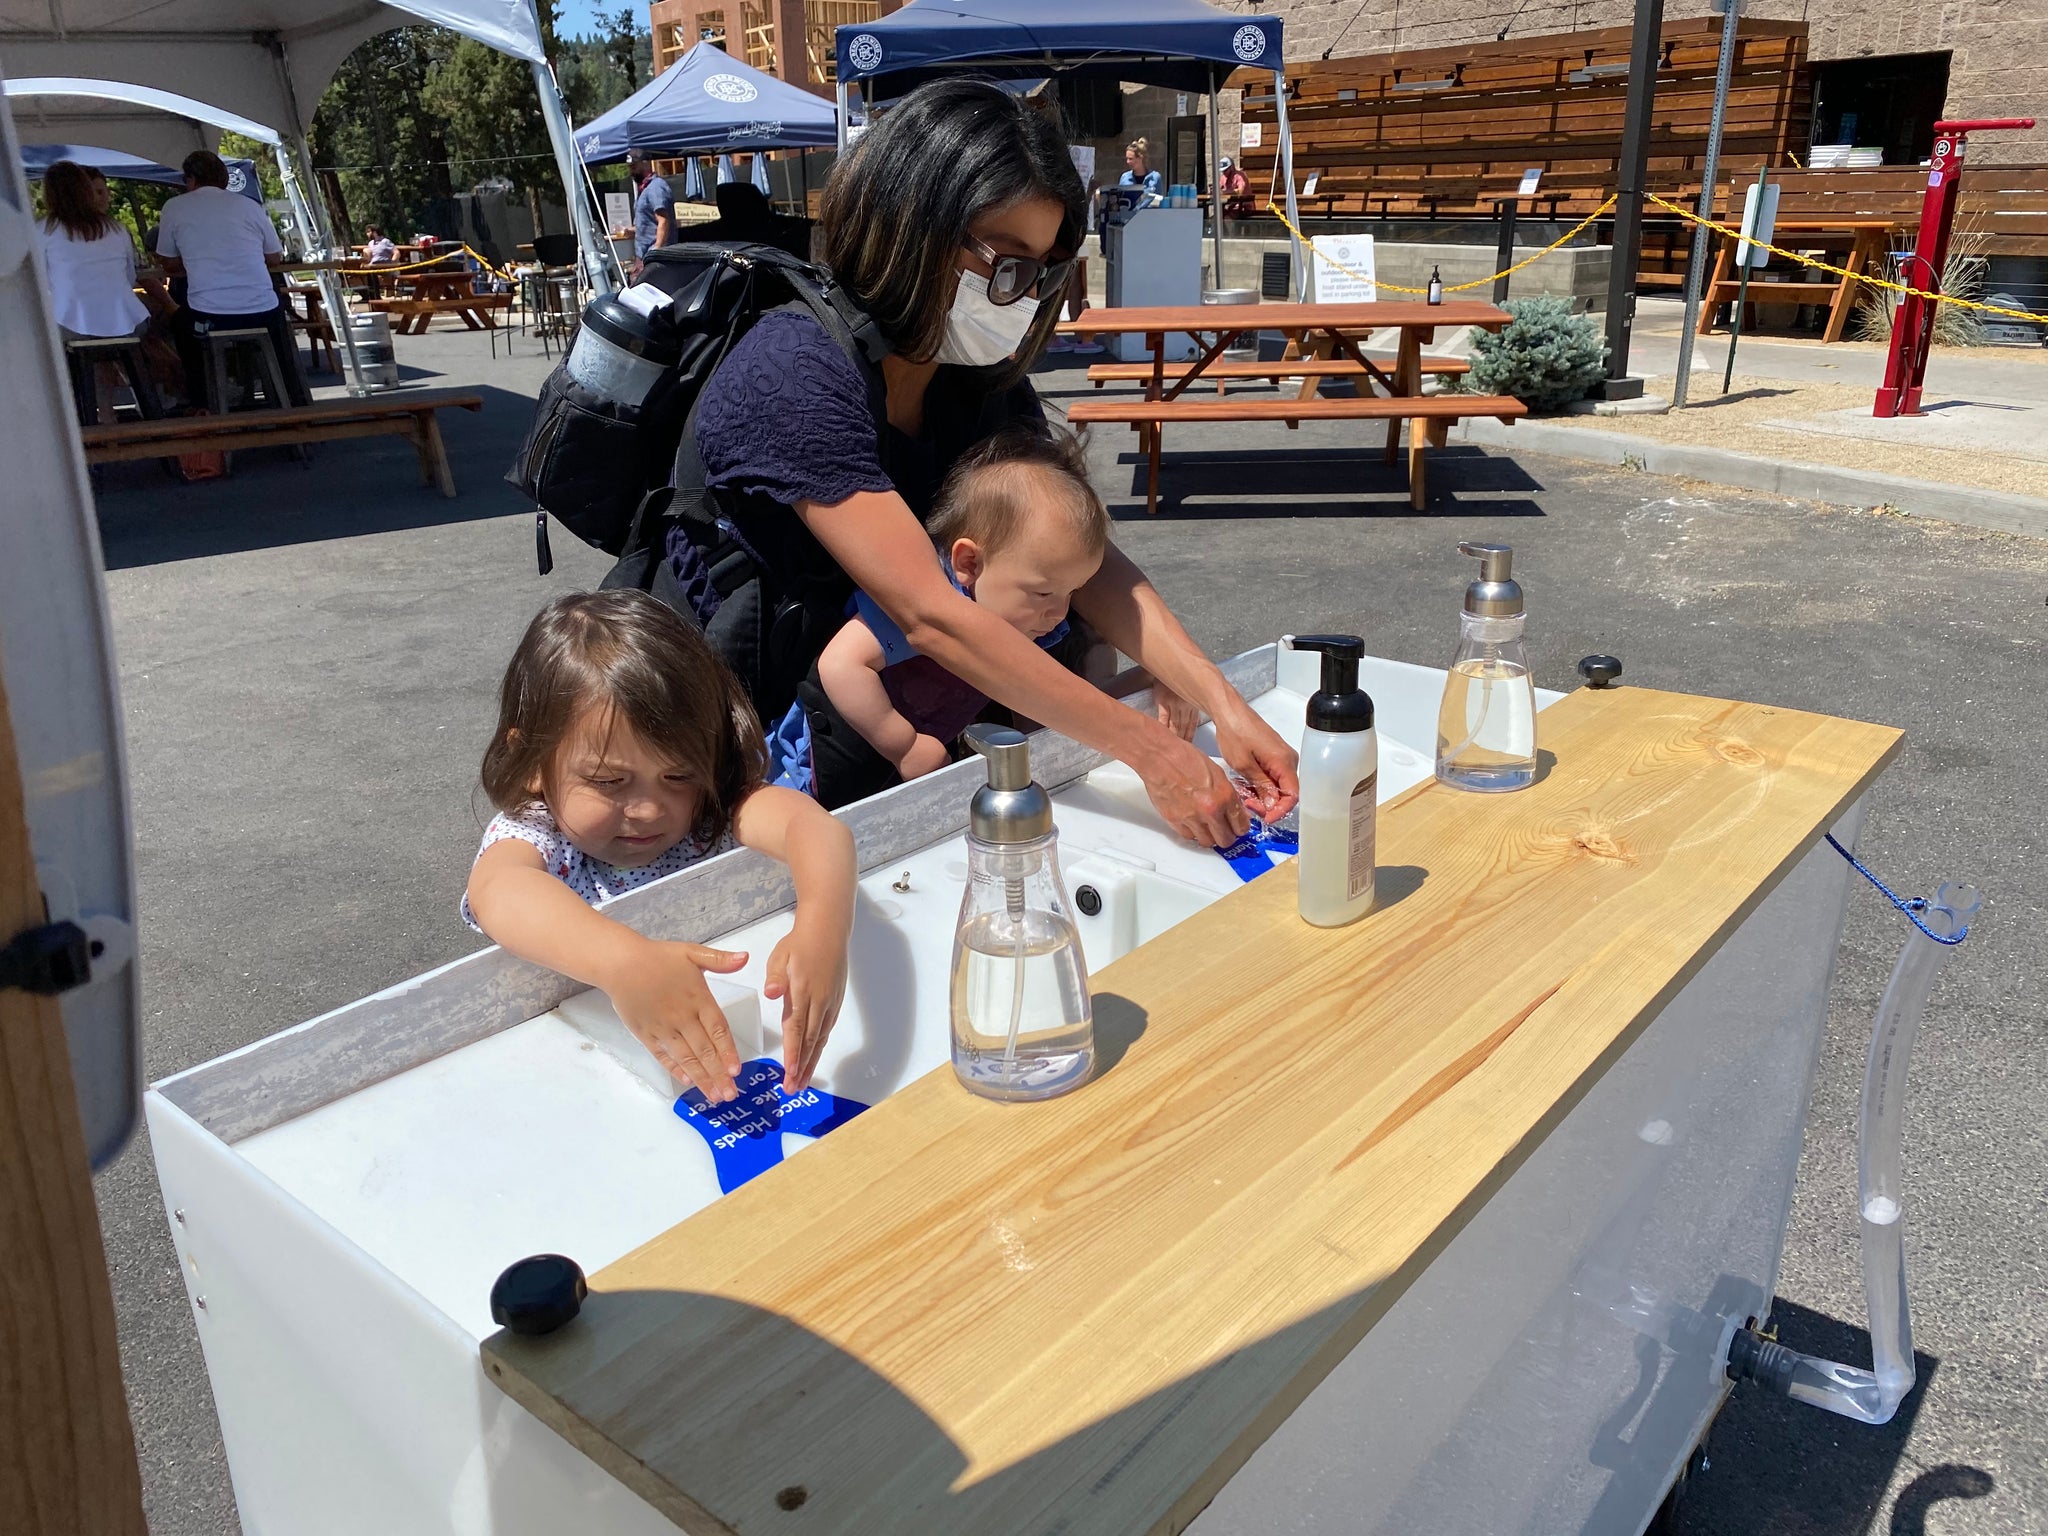 Table Top - Portable Hand Washing Station - West Coast Event Productions,  Inc.